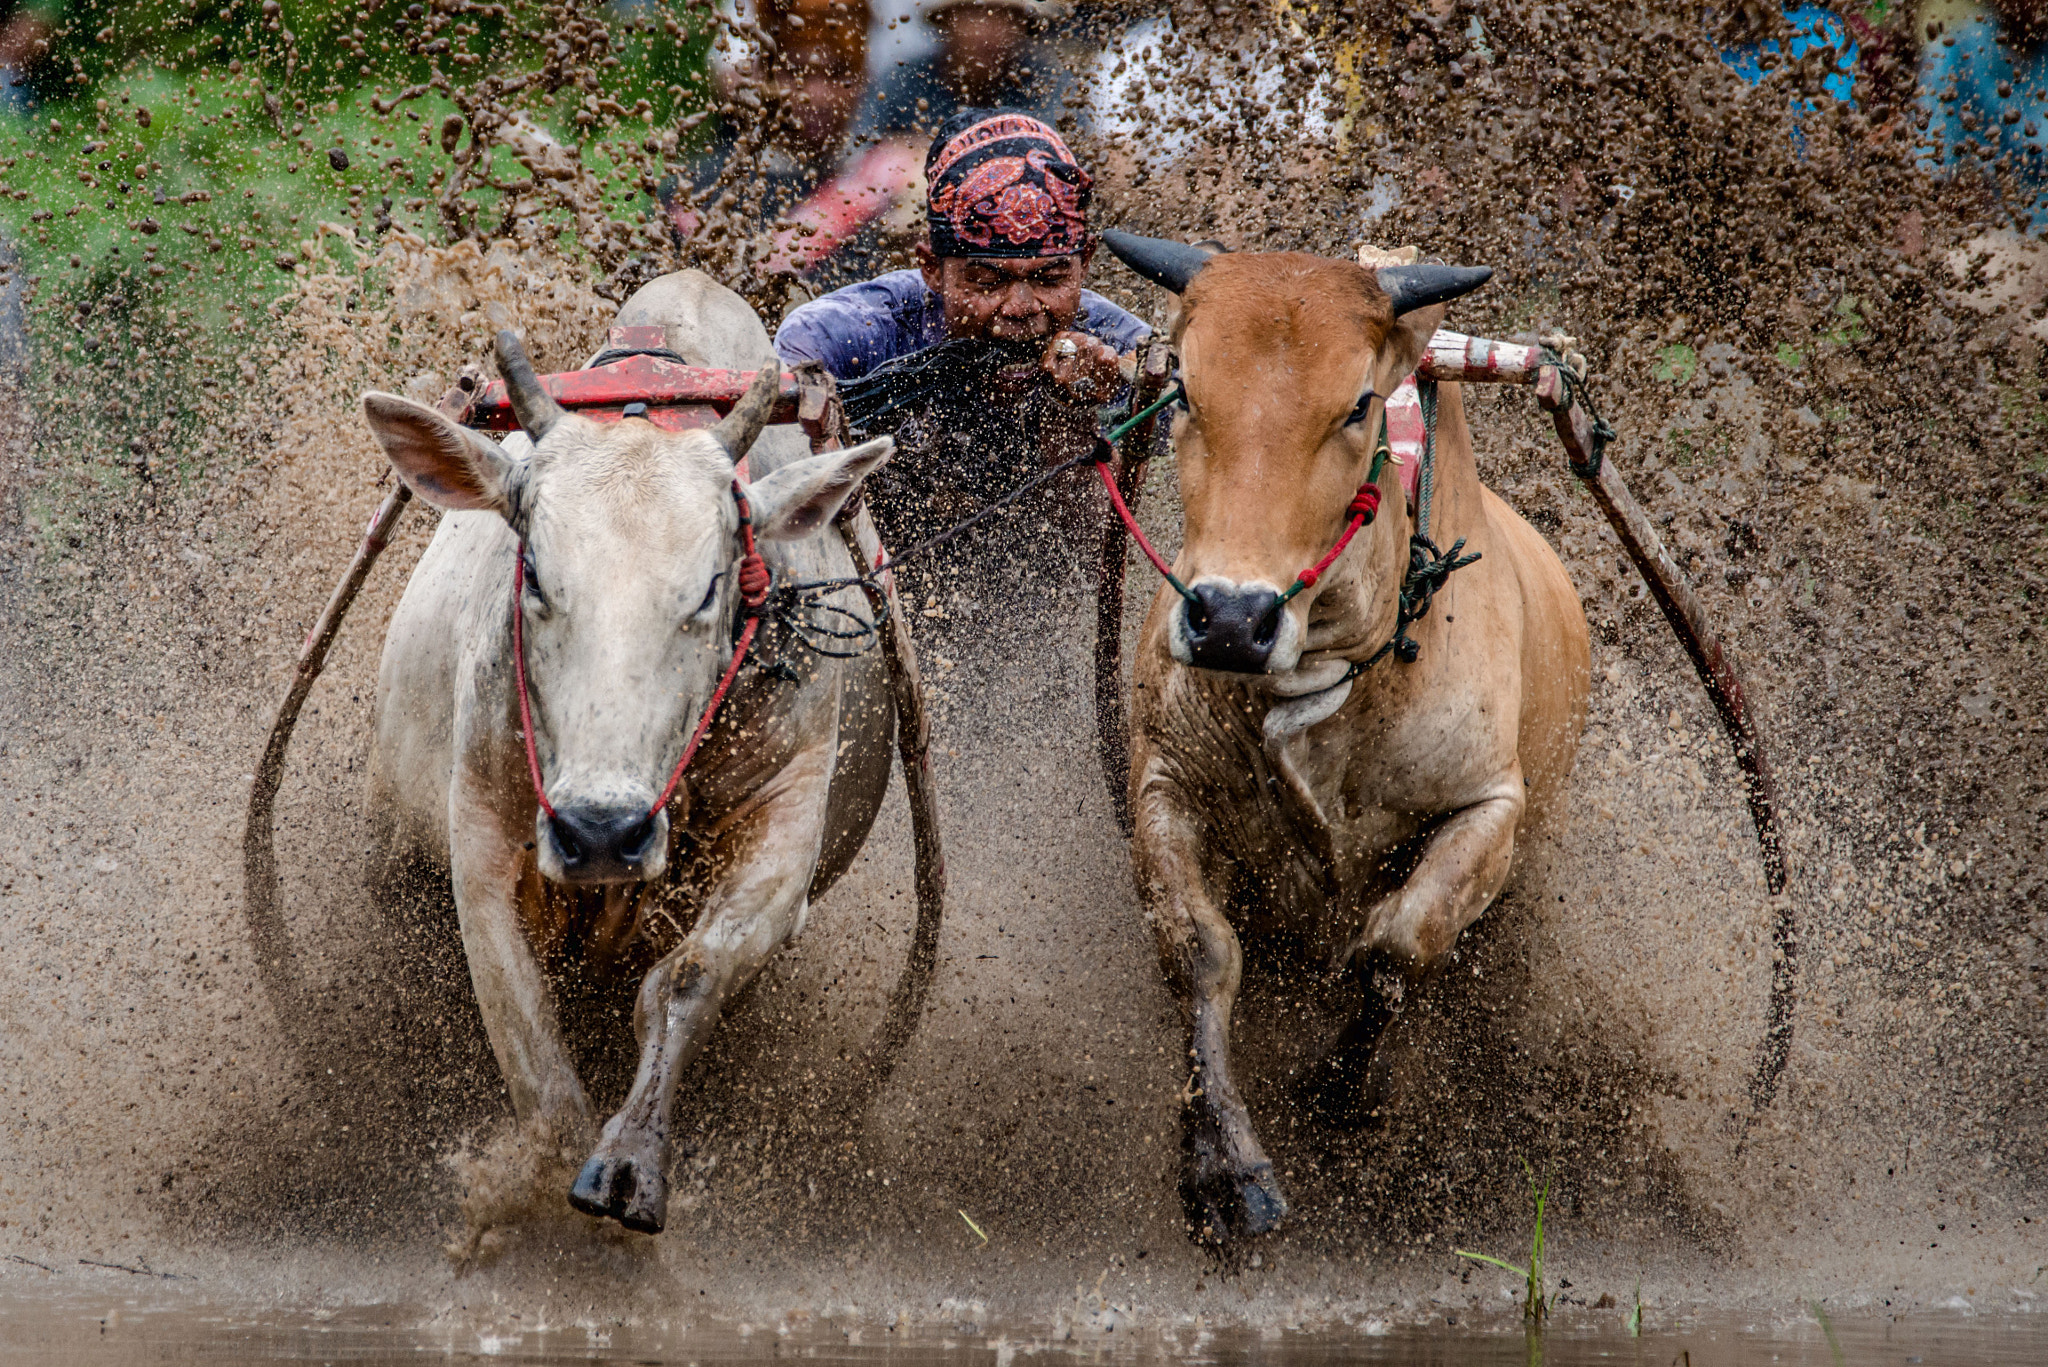 Nikon D800 + Sigma 150-600mm F5-6.3 DG OS HSM | C sample photo. A jockey races a pair of bulls at the pacu jawi event in western sumatra. photography